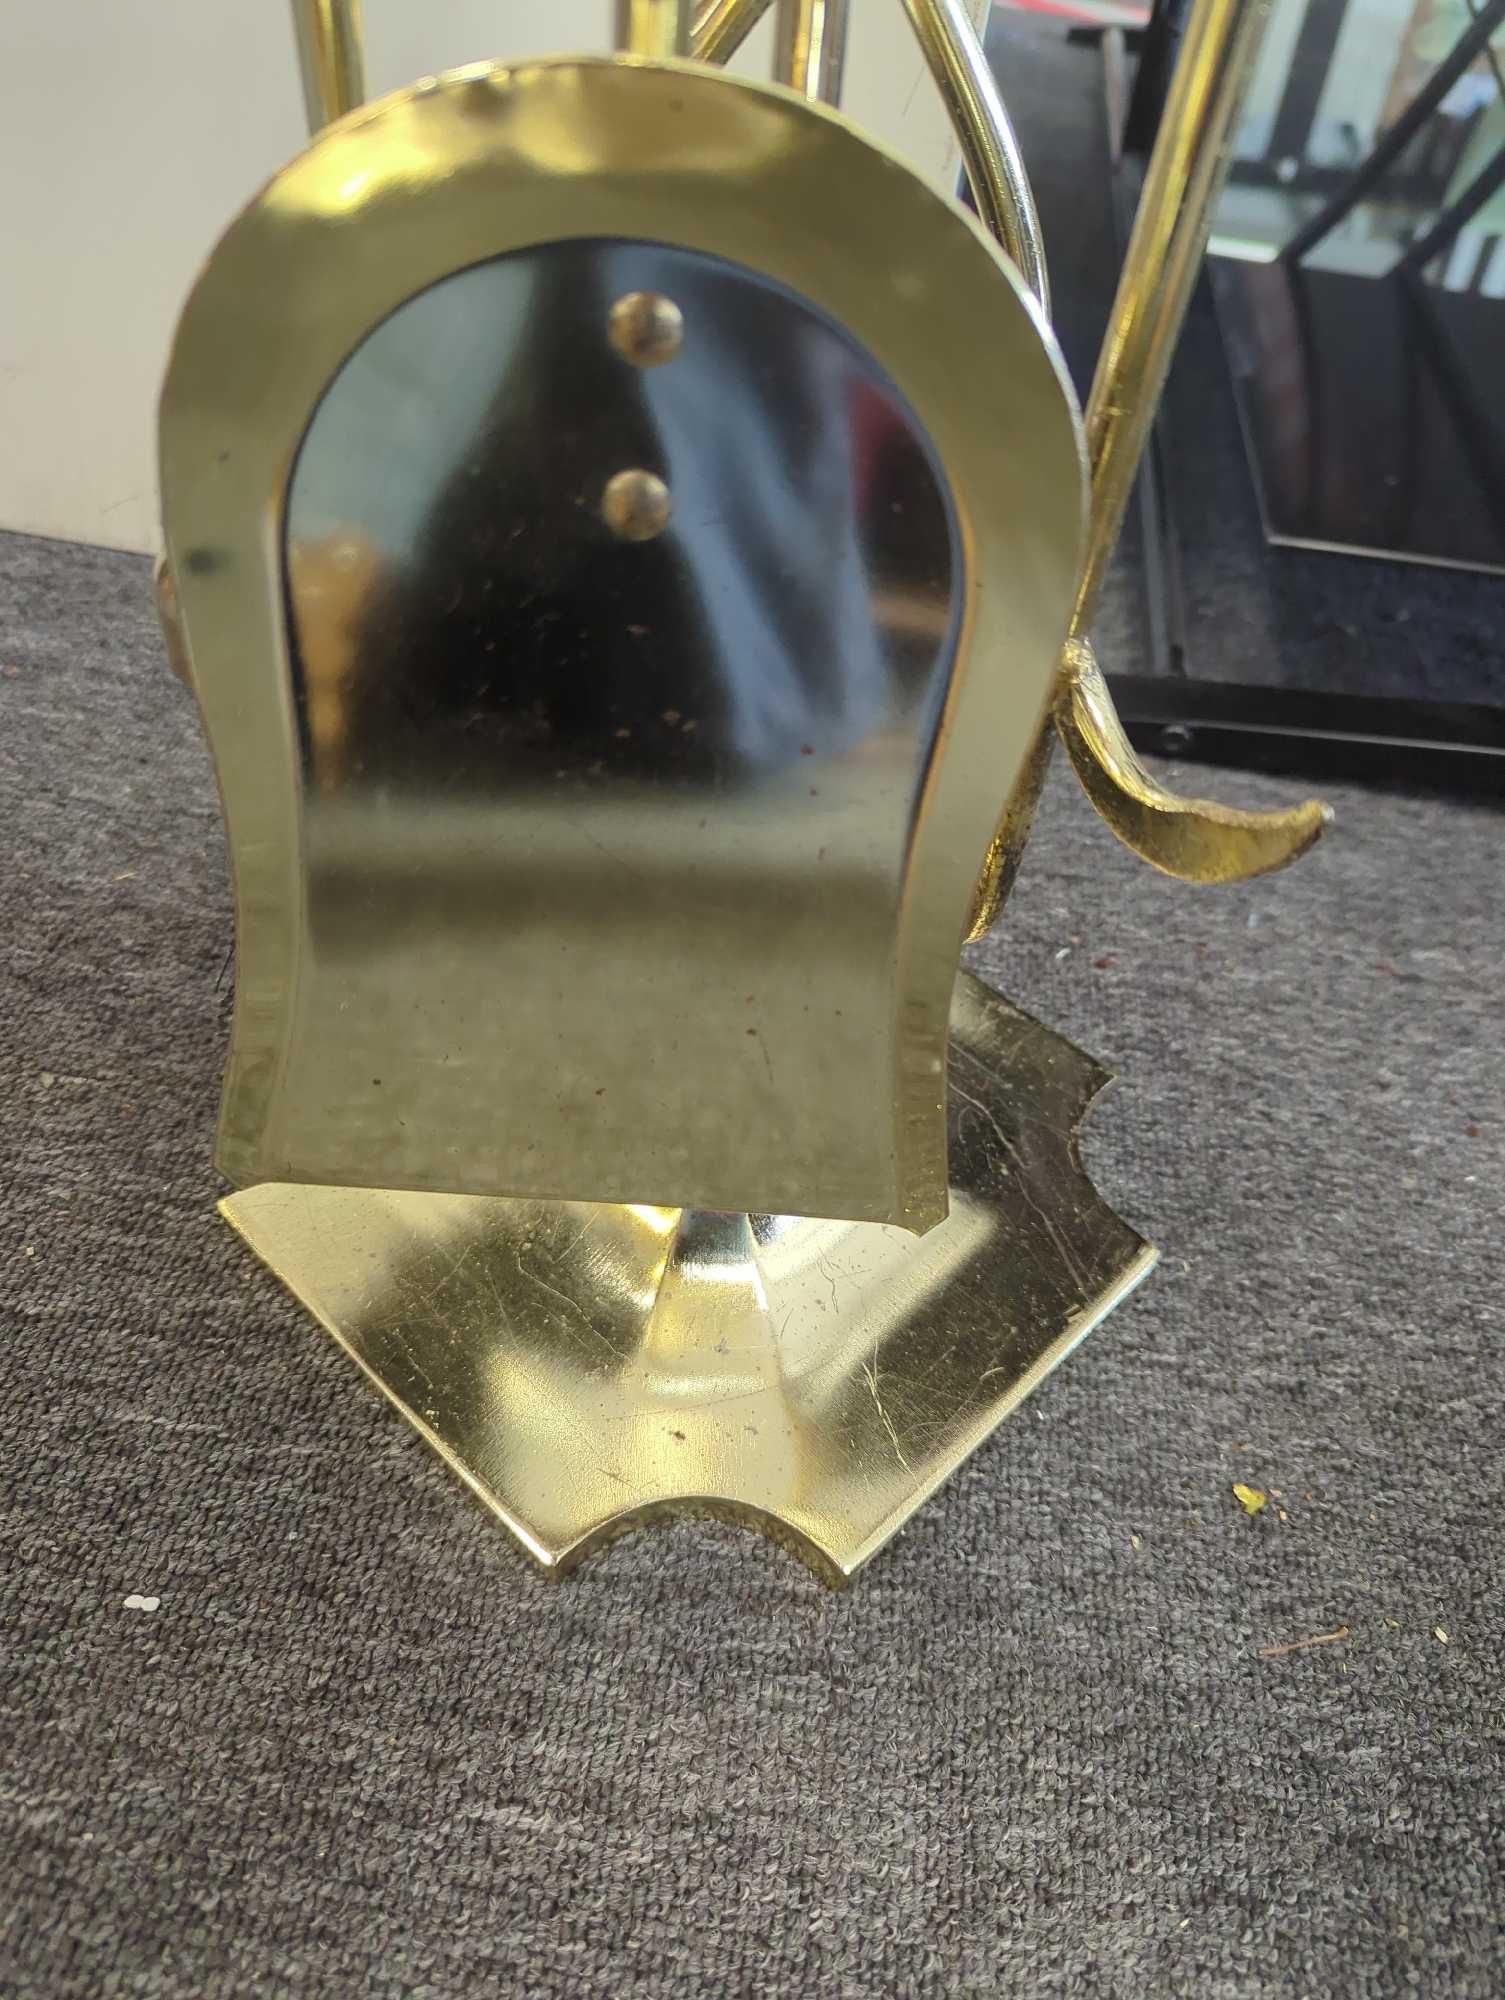 Heavy Brass 4-Piece Fireplace Set Polished Brass, In Great Condition What you see in photos is what